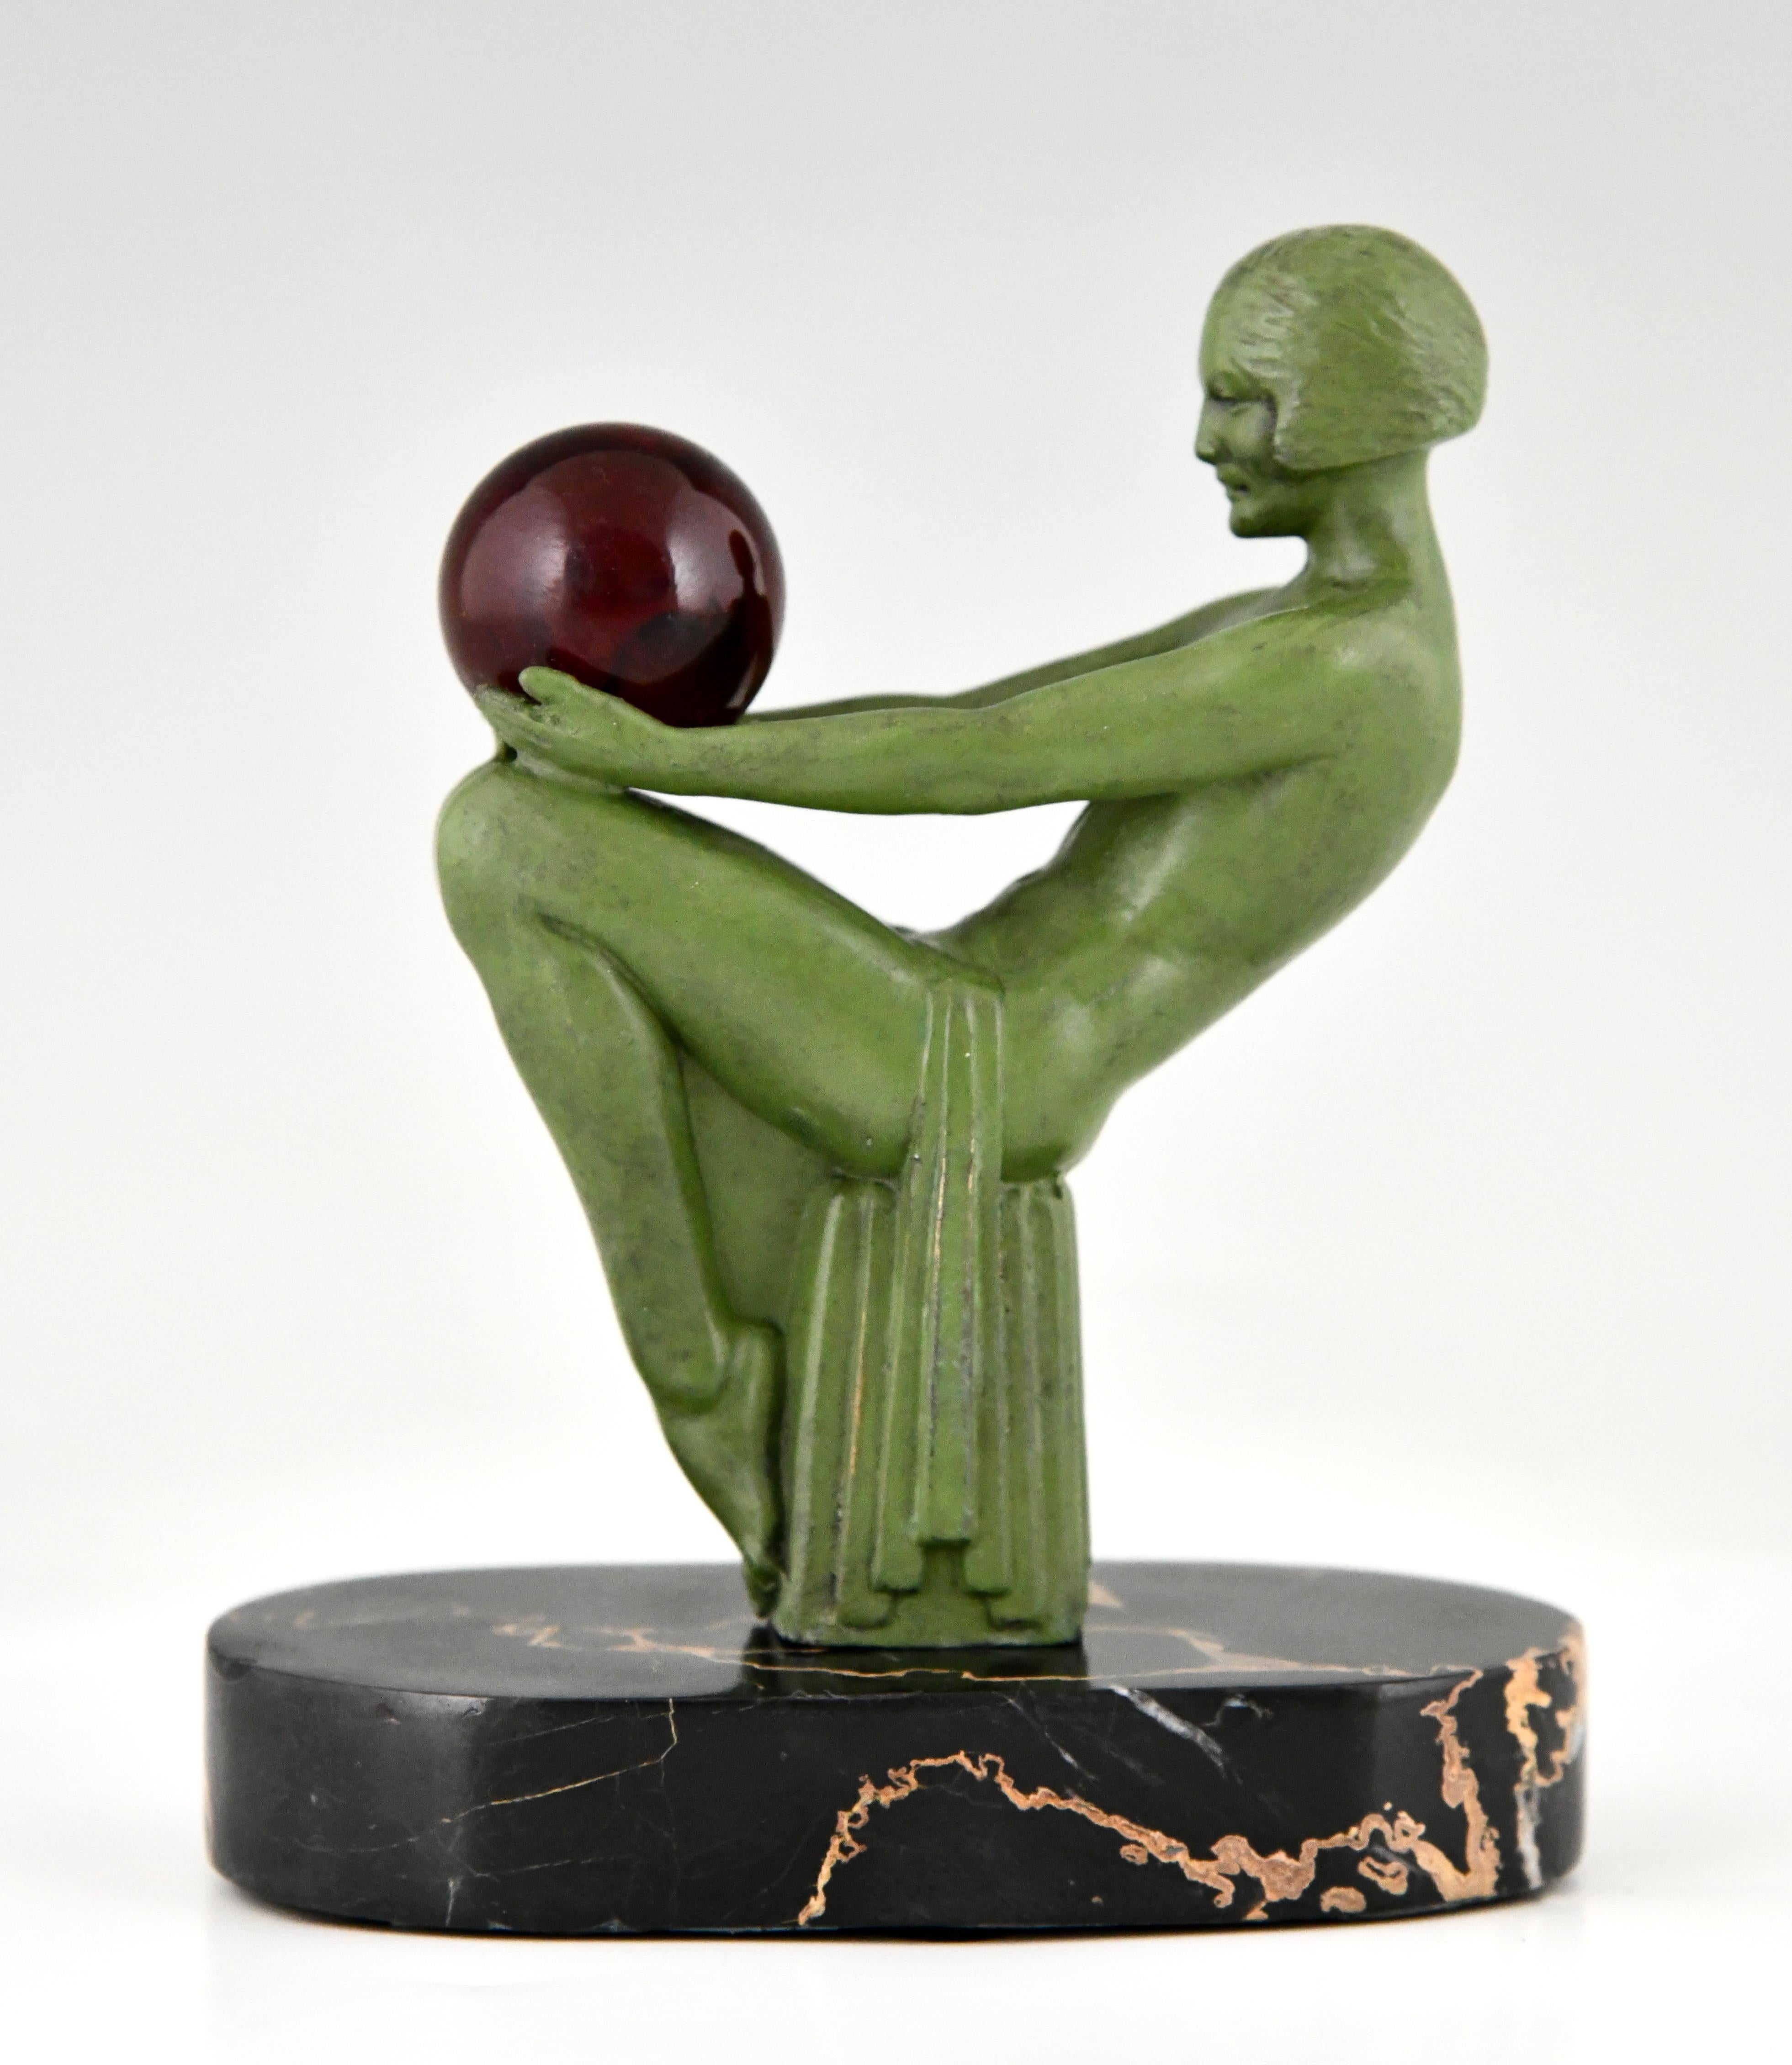 Art Deco sculpture seated nude with ball signed by Max Le Verrier. 
The sculpture is cast in Art Metal with green patina on an oval Portor marble base
France 1930.